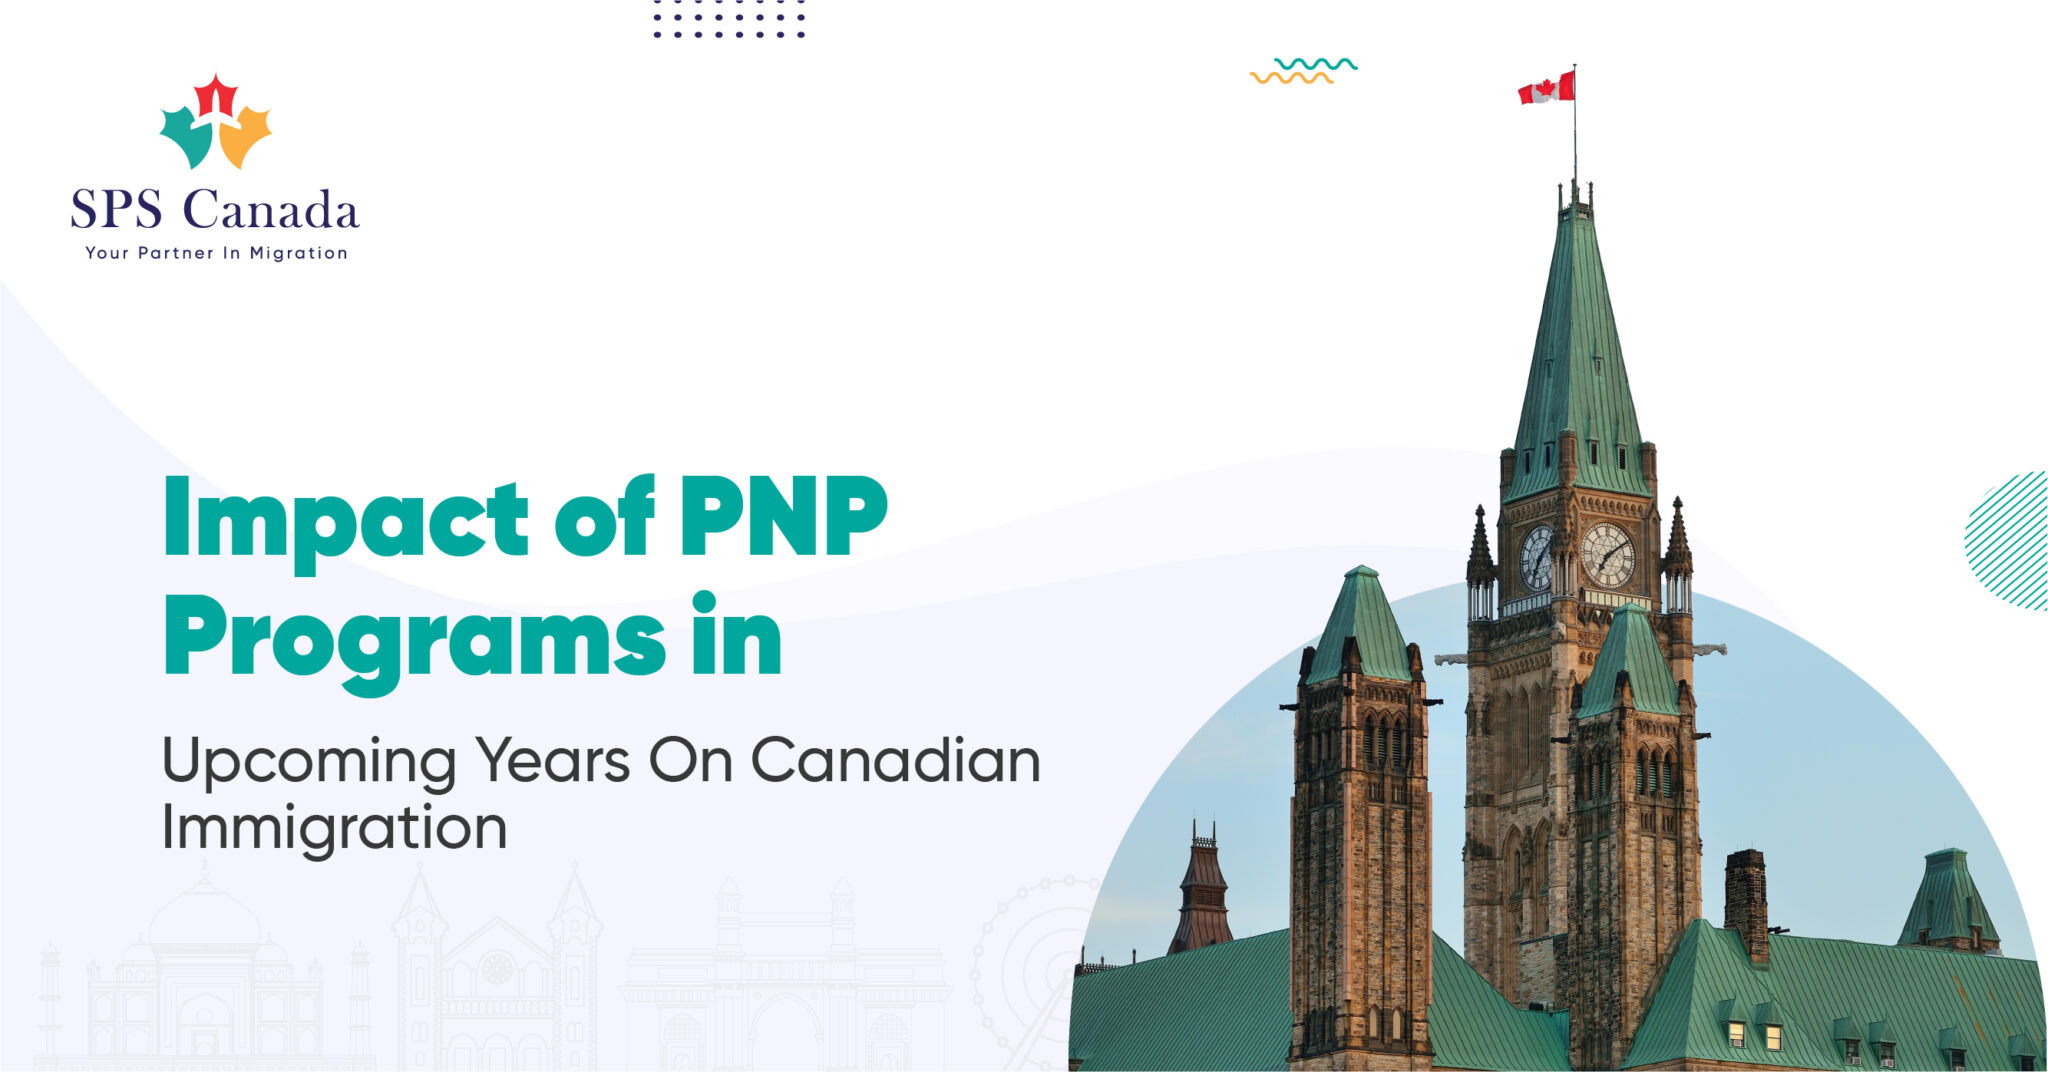 Impact of PNP Programs in years on Canadian immigration • SPS